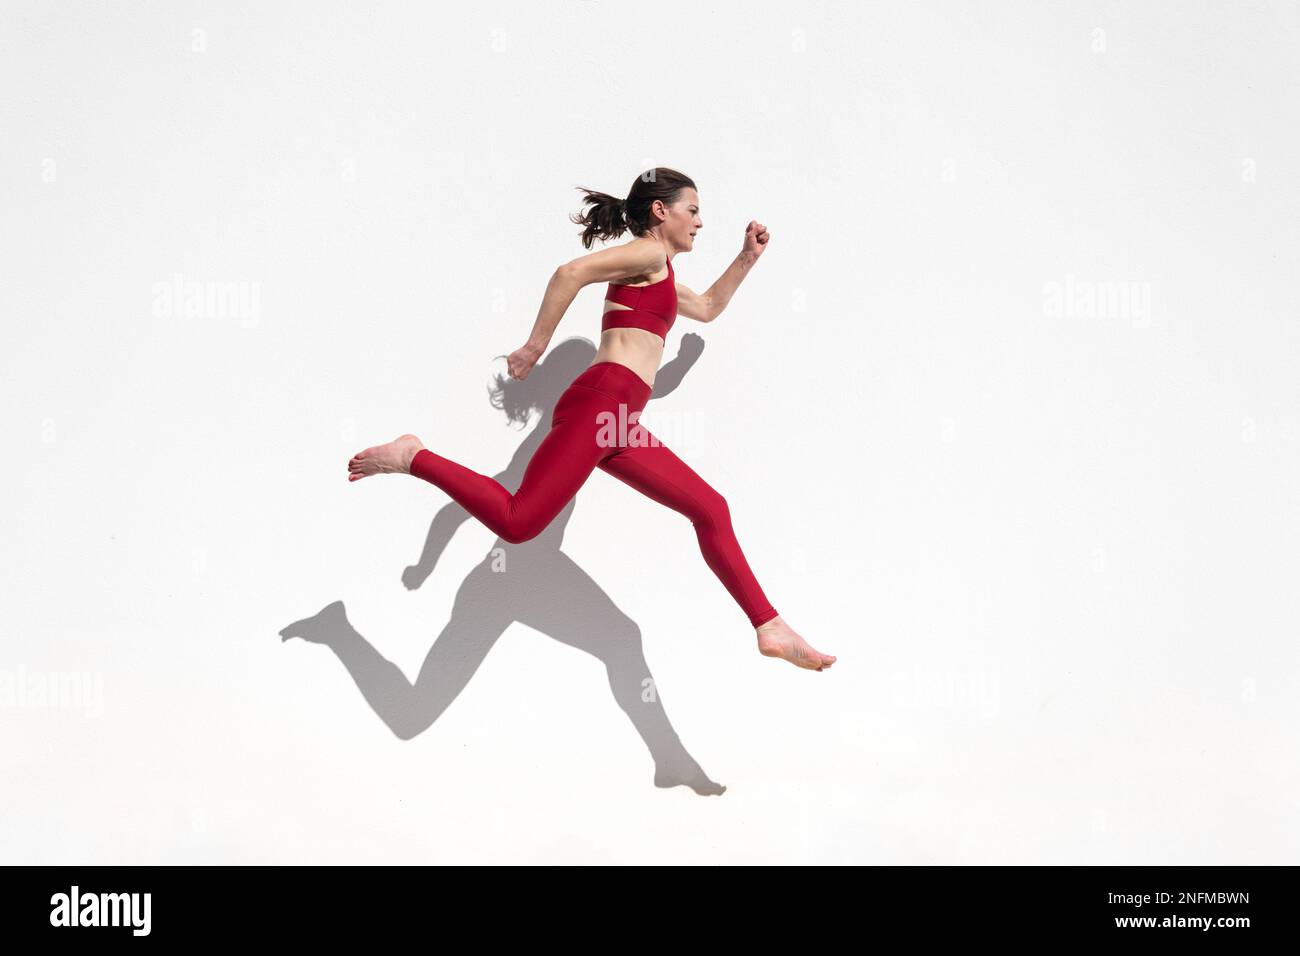 Sporty woman running and jumping Stock Photo